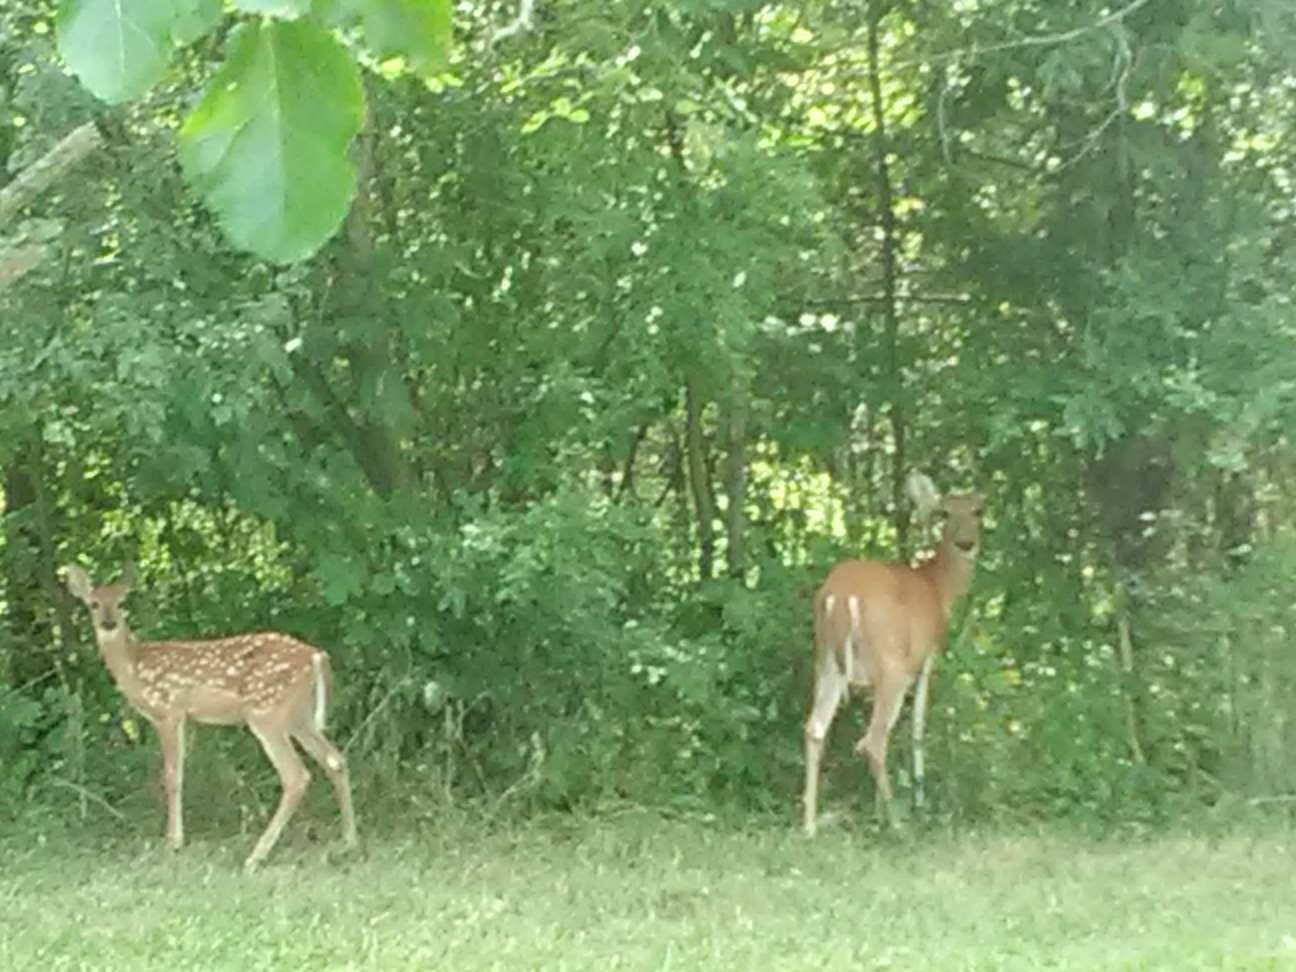 Wild Deer, Doe and Fawn at Edge of Woods in Sunlight